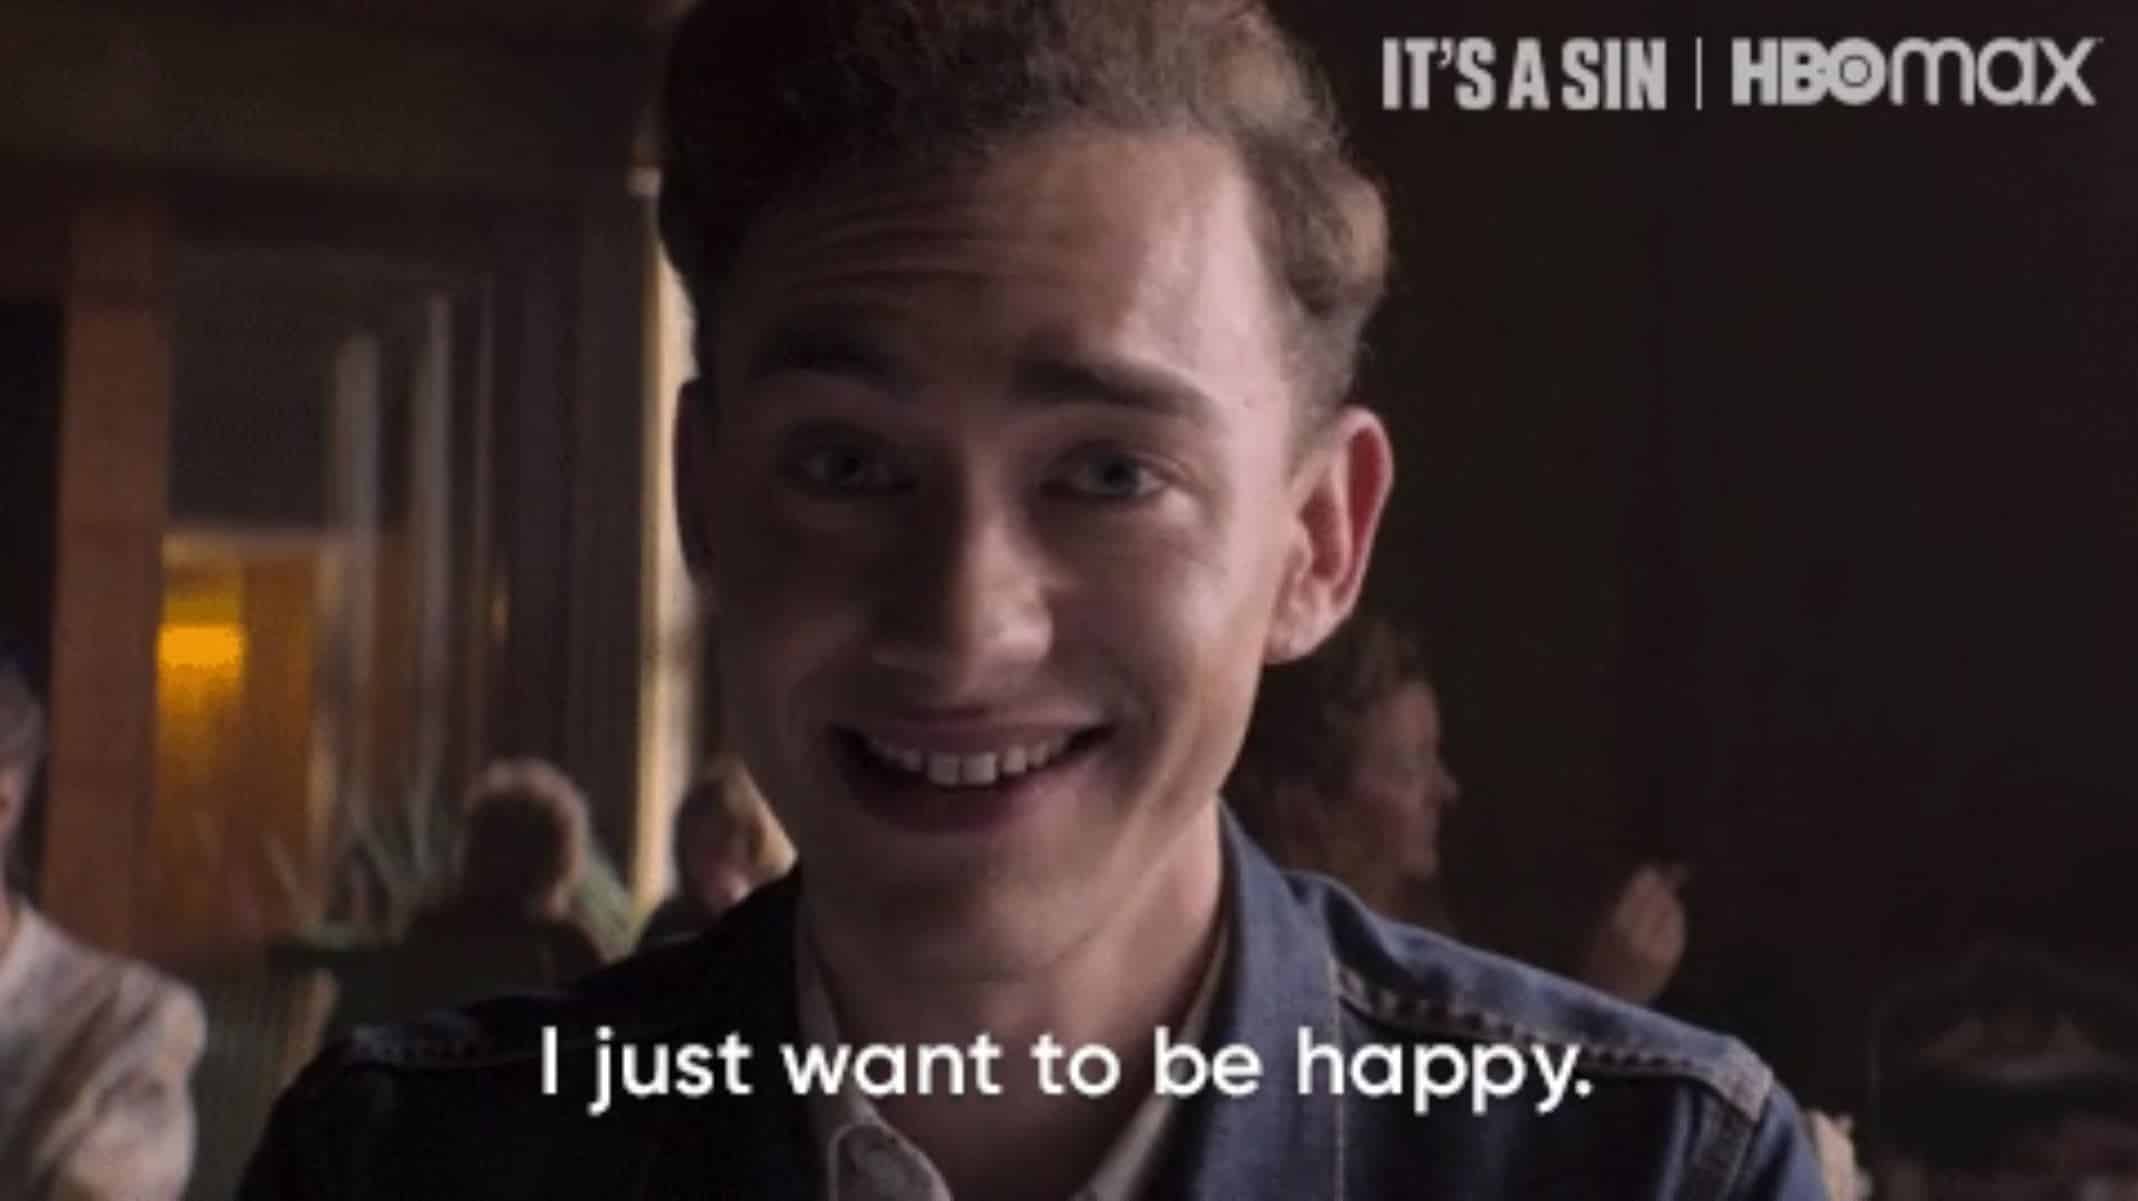 Screenshot of Ritchie from It's a Sin with the text "I just want to be happy."